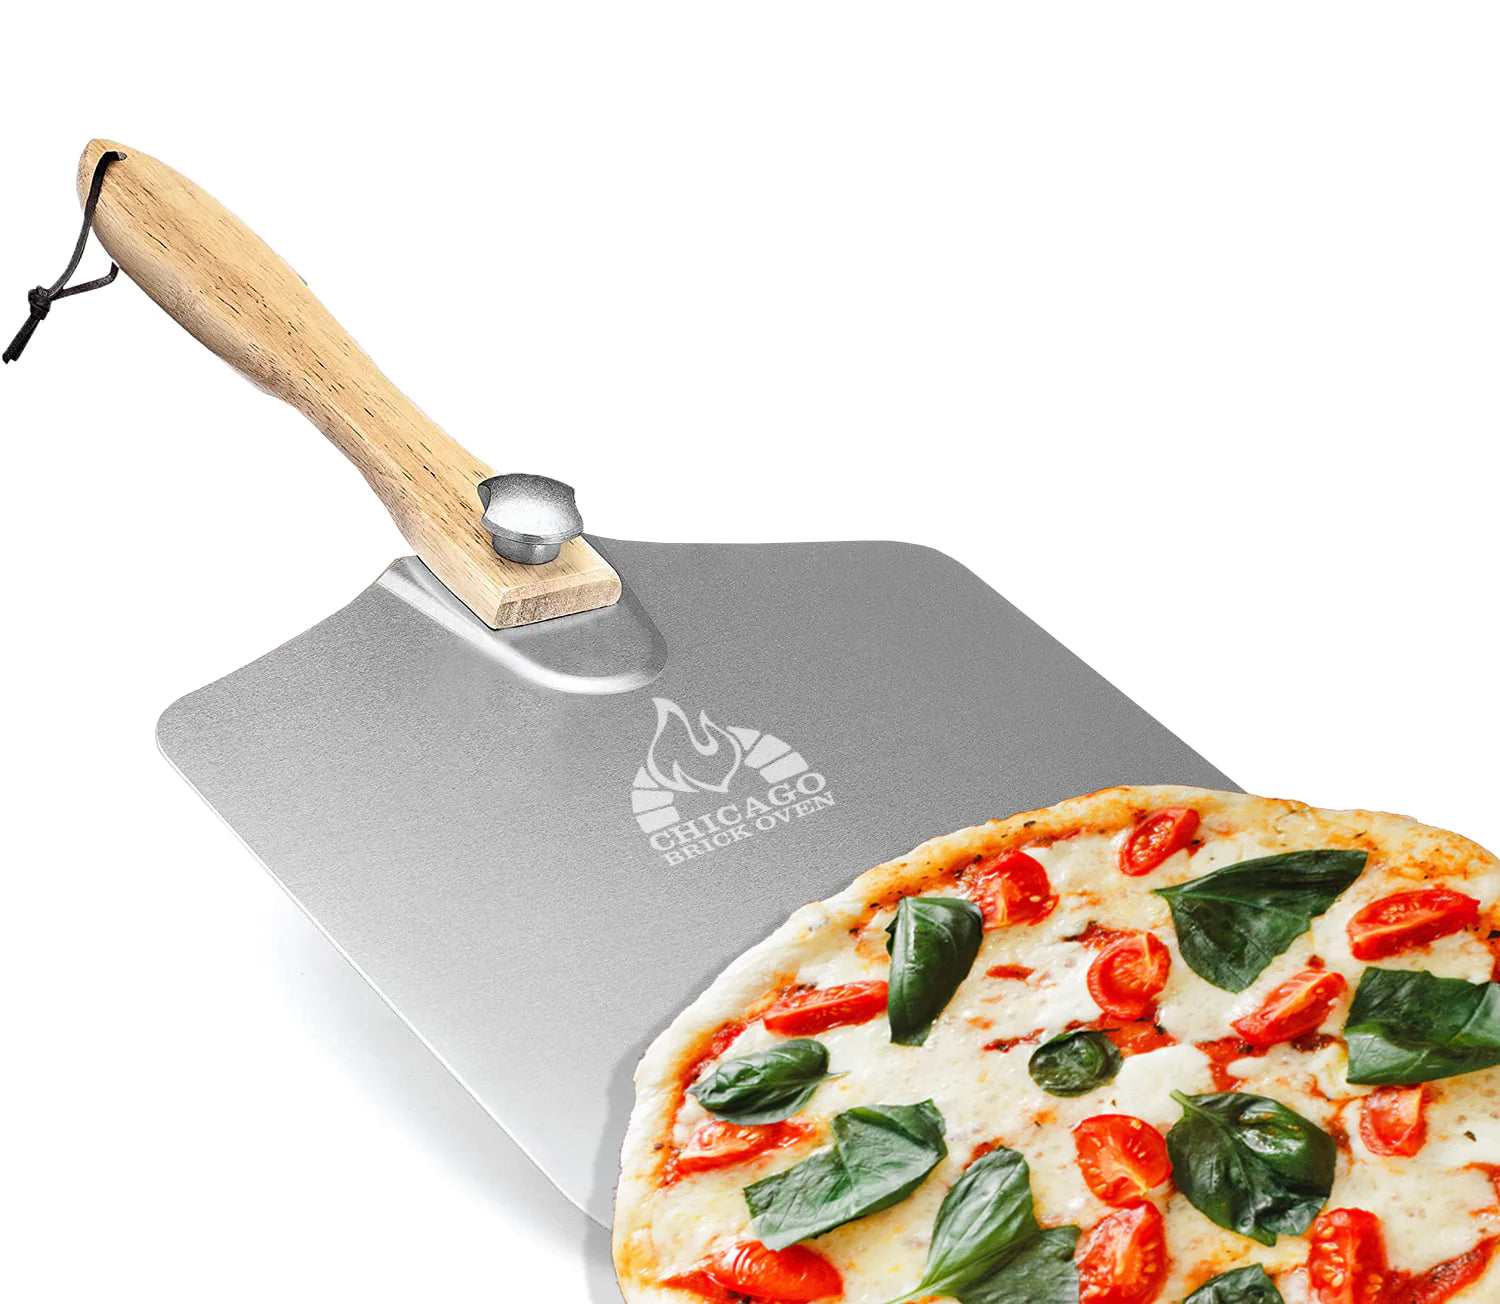 Chicago Brick Oven Foldable Pizza Peel with Wooden Paddle Handle, 12" x 14", Turning Spatula, Easy to Store, Brick Oven Grill Kitchen Accessories